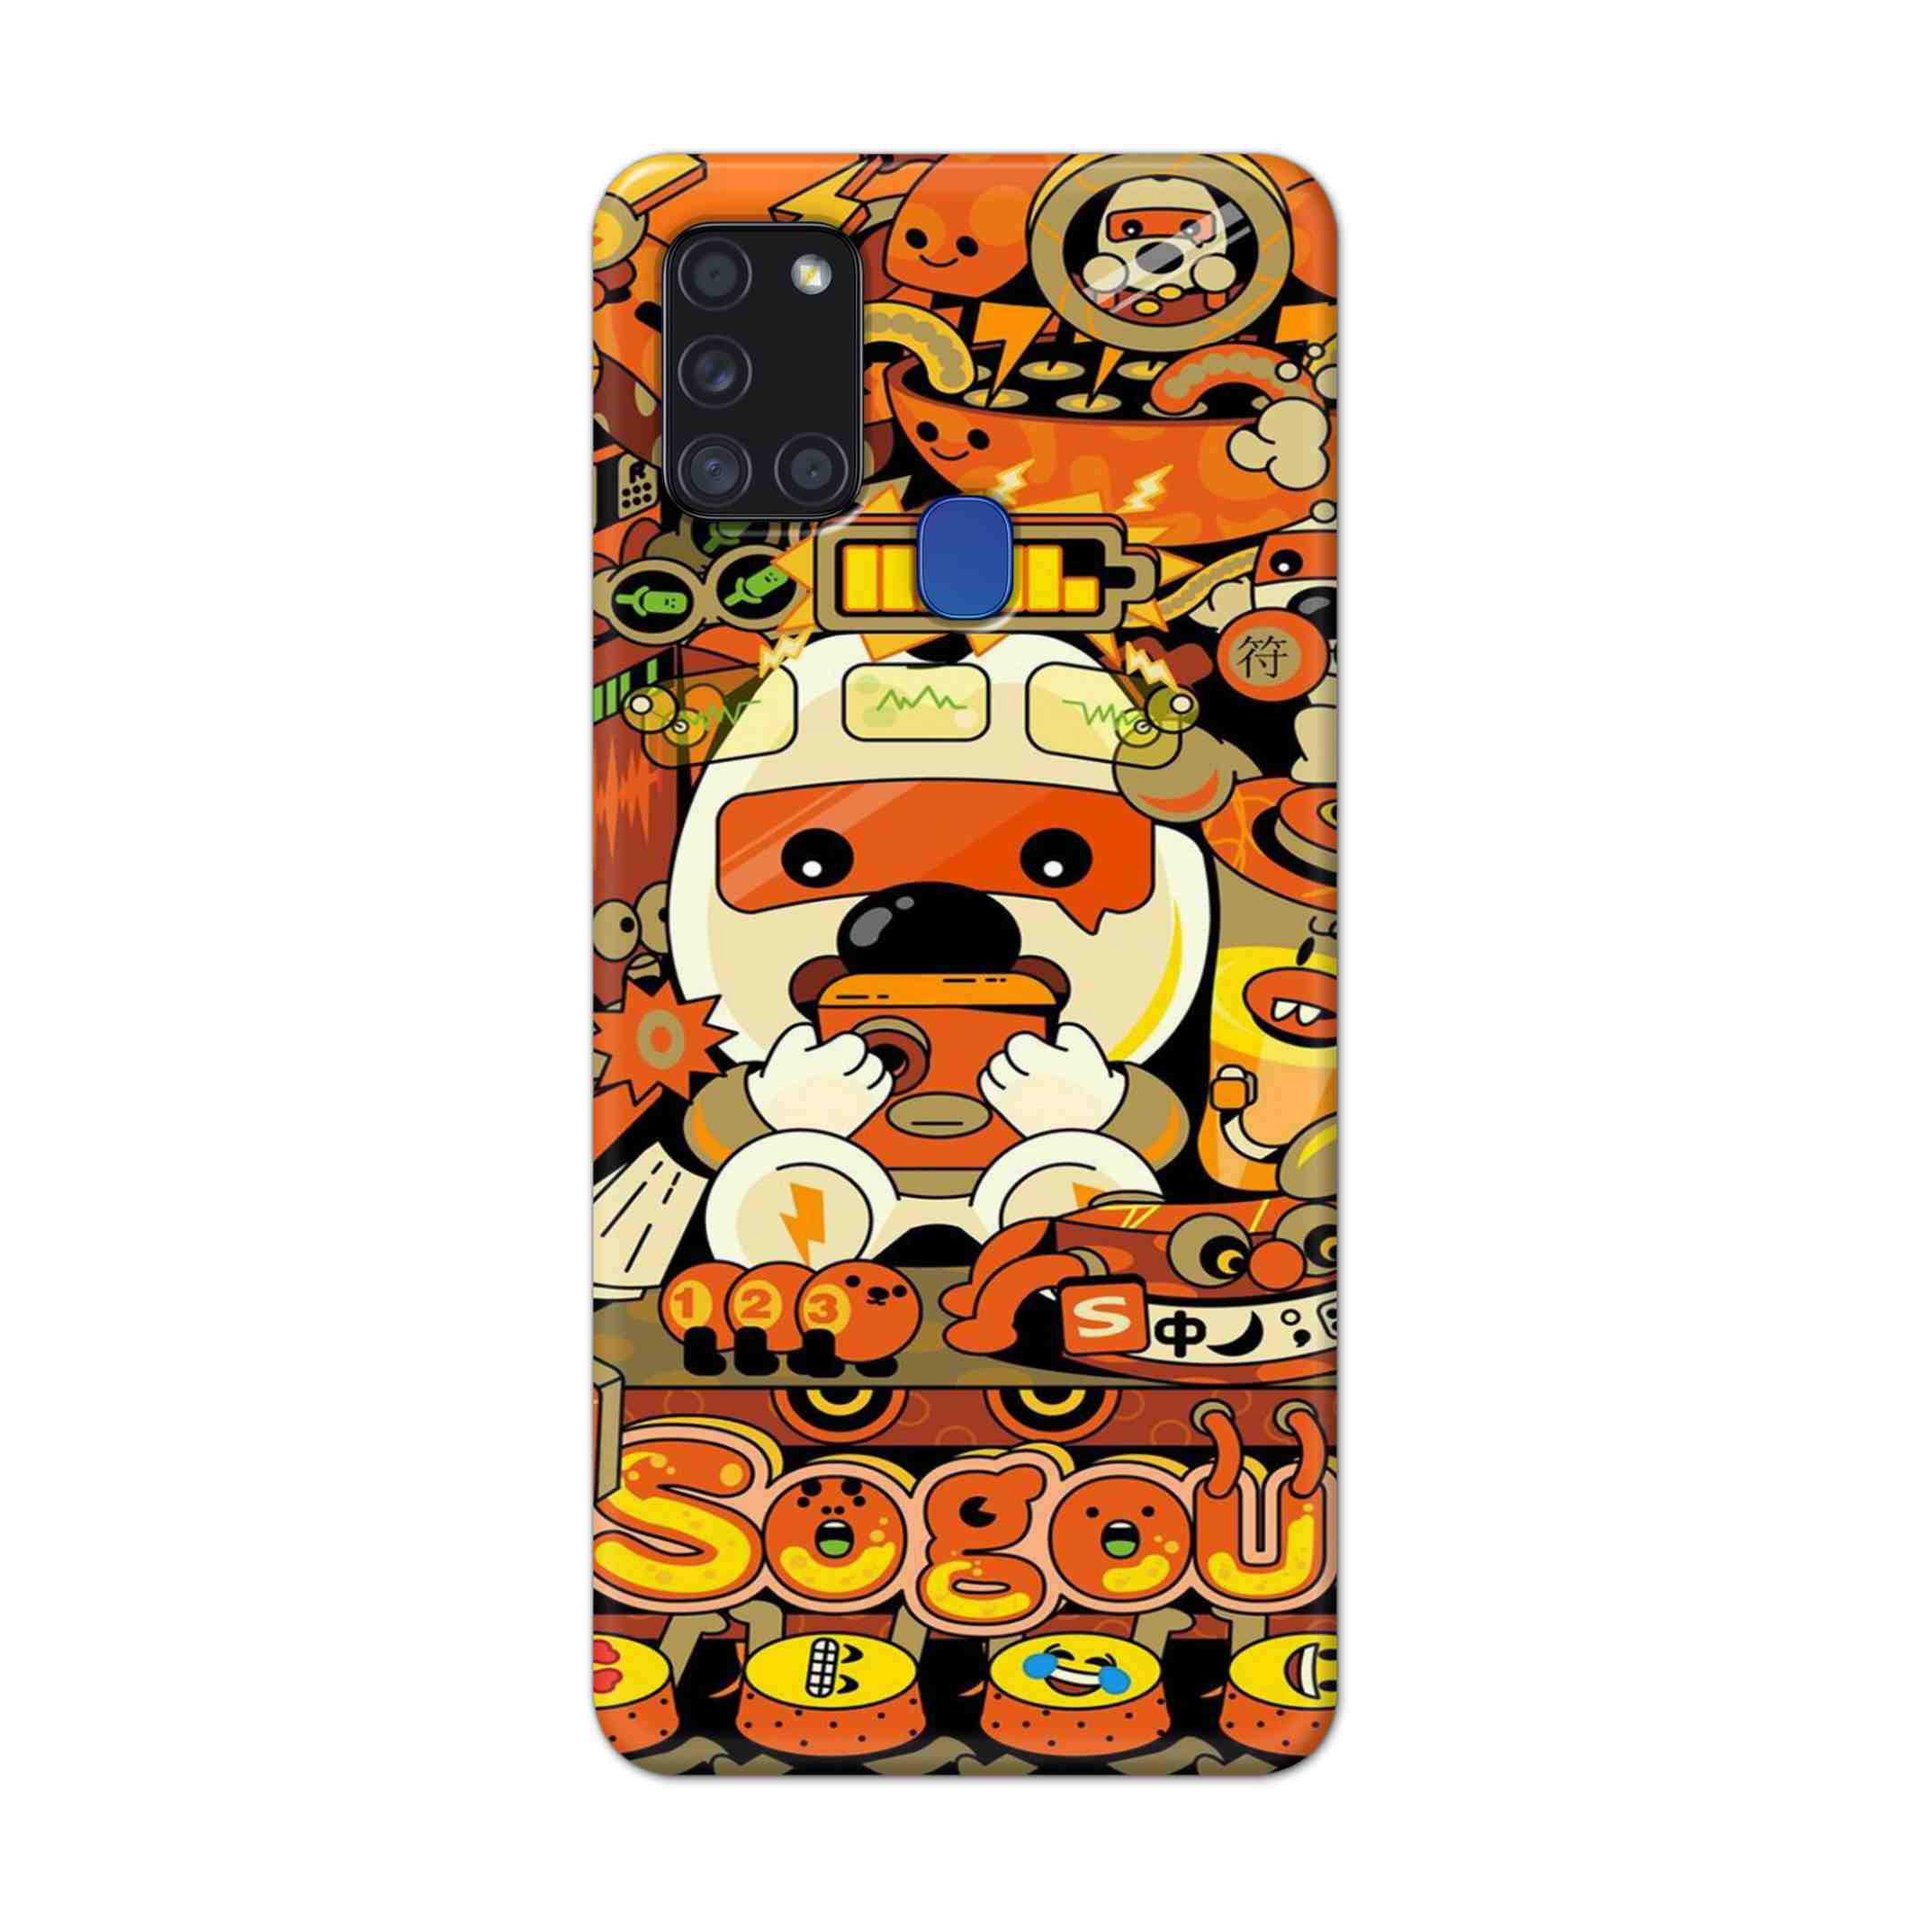 Buy Sogou Hard Back Mobile Phone Case Cover For Samsung Galaxy A21s Online